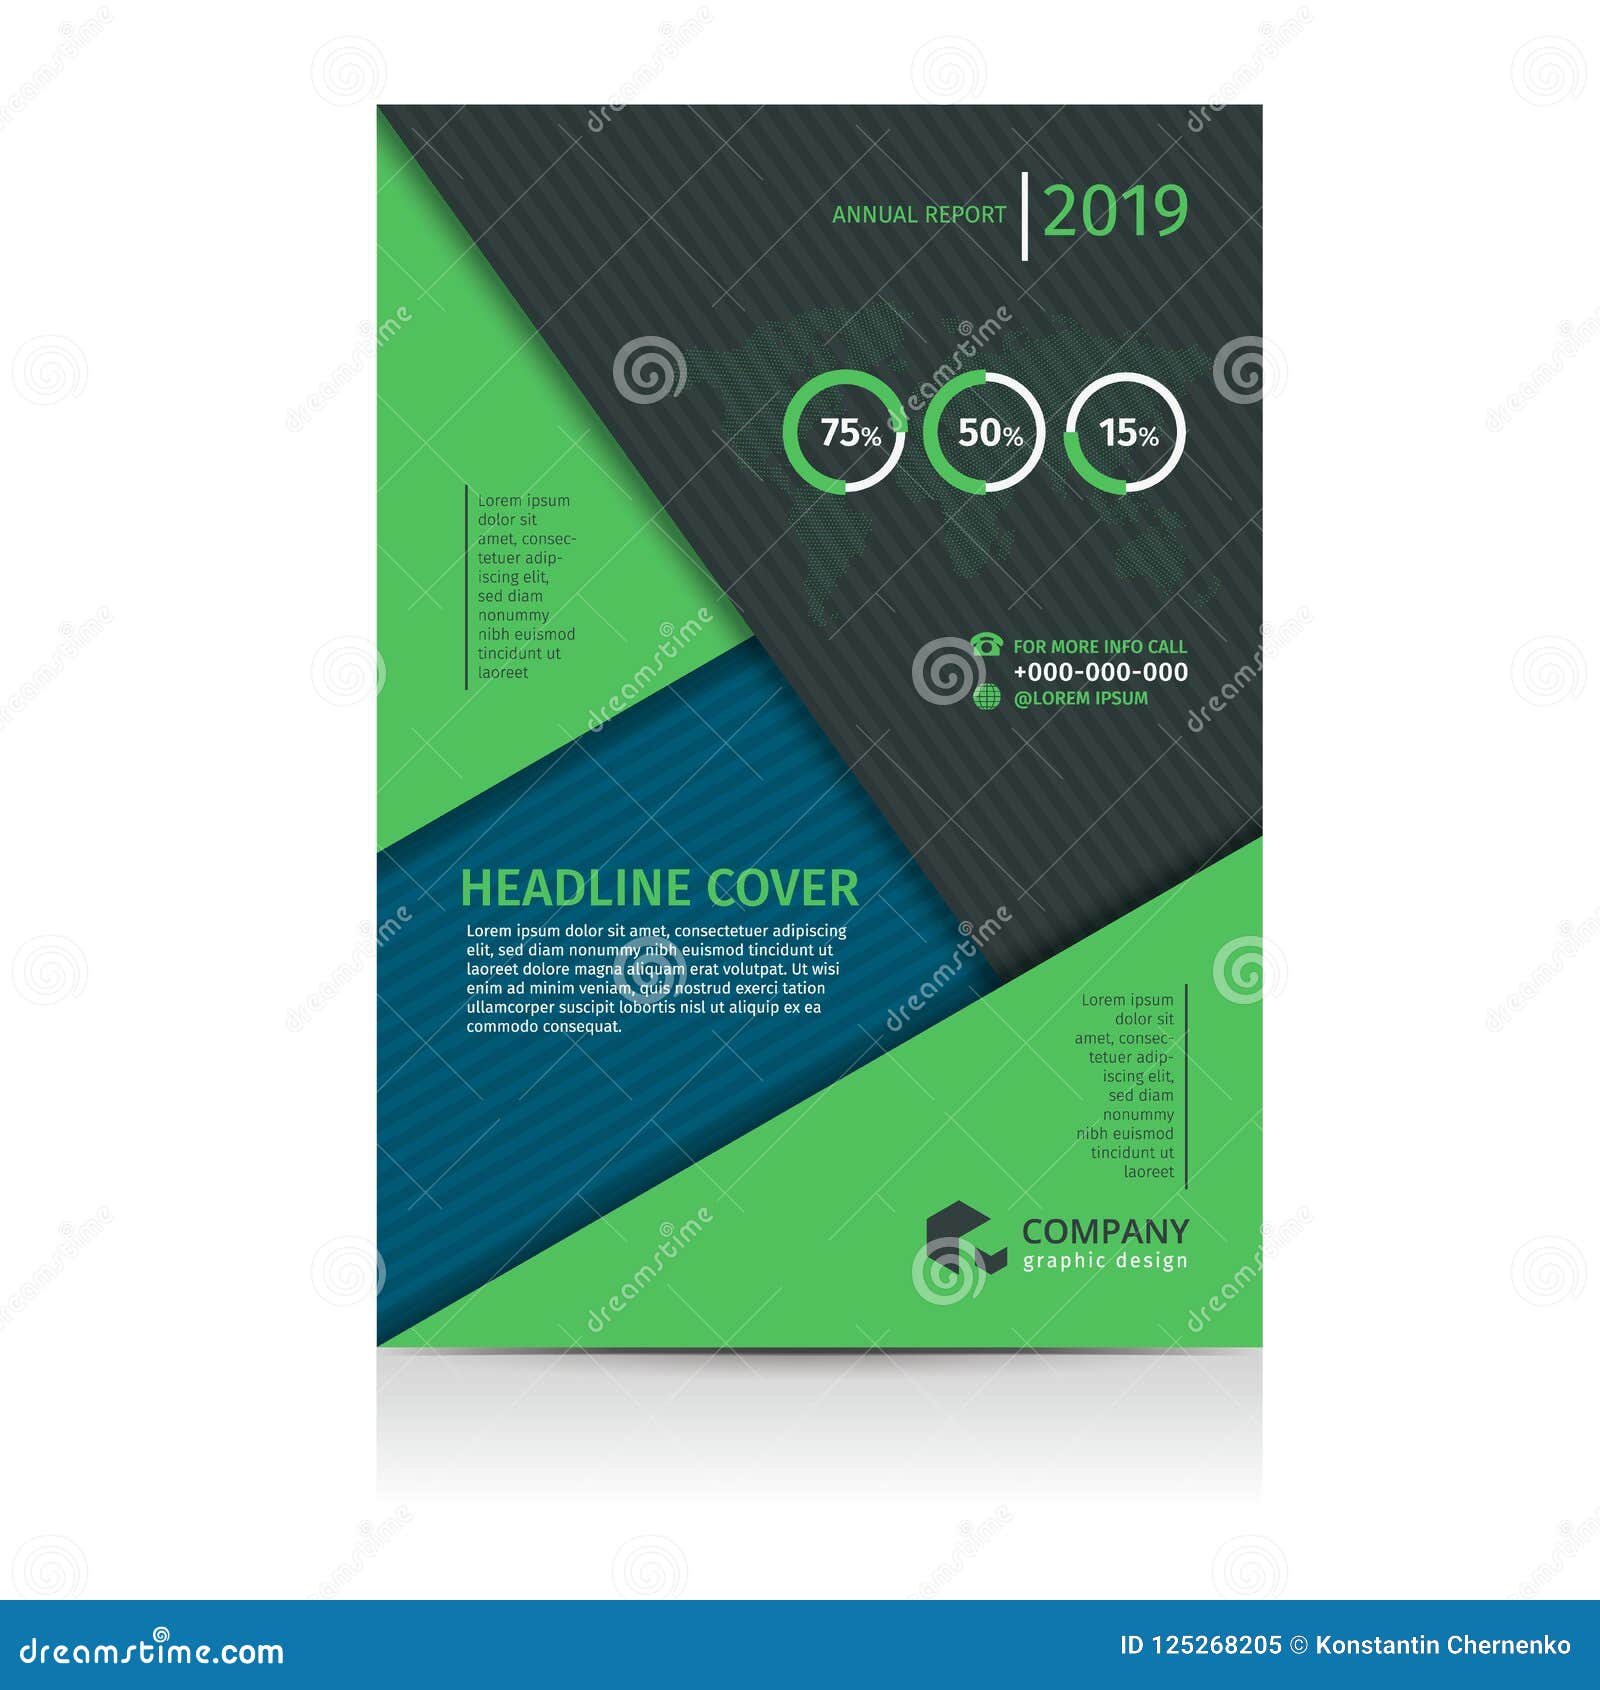 Simple Business Flyer Template A4 Size Design Stock Vector